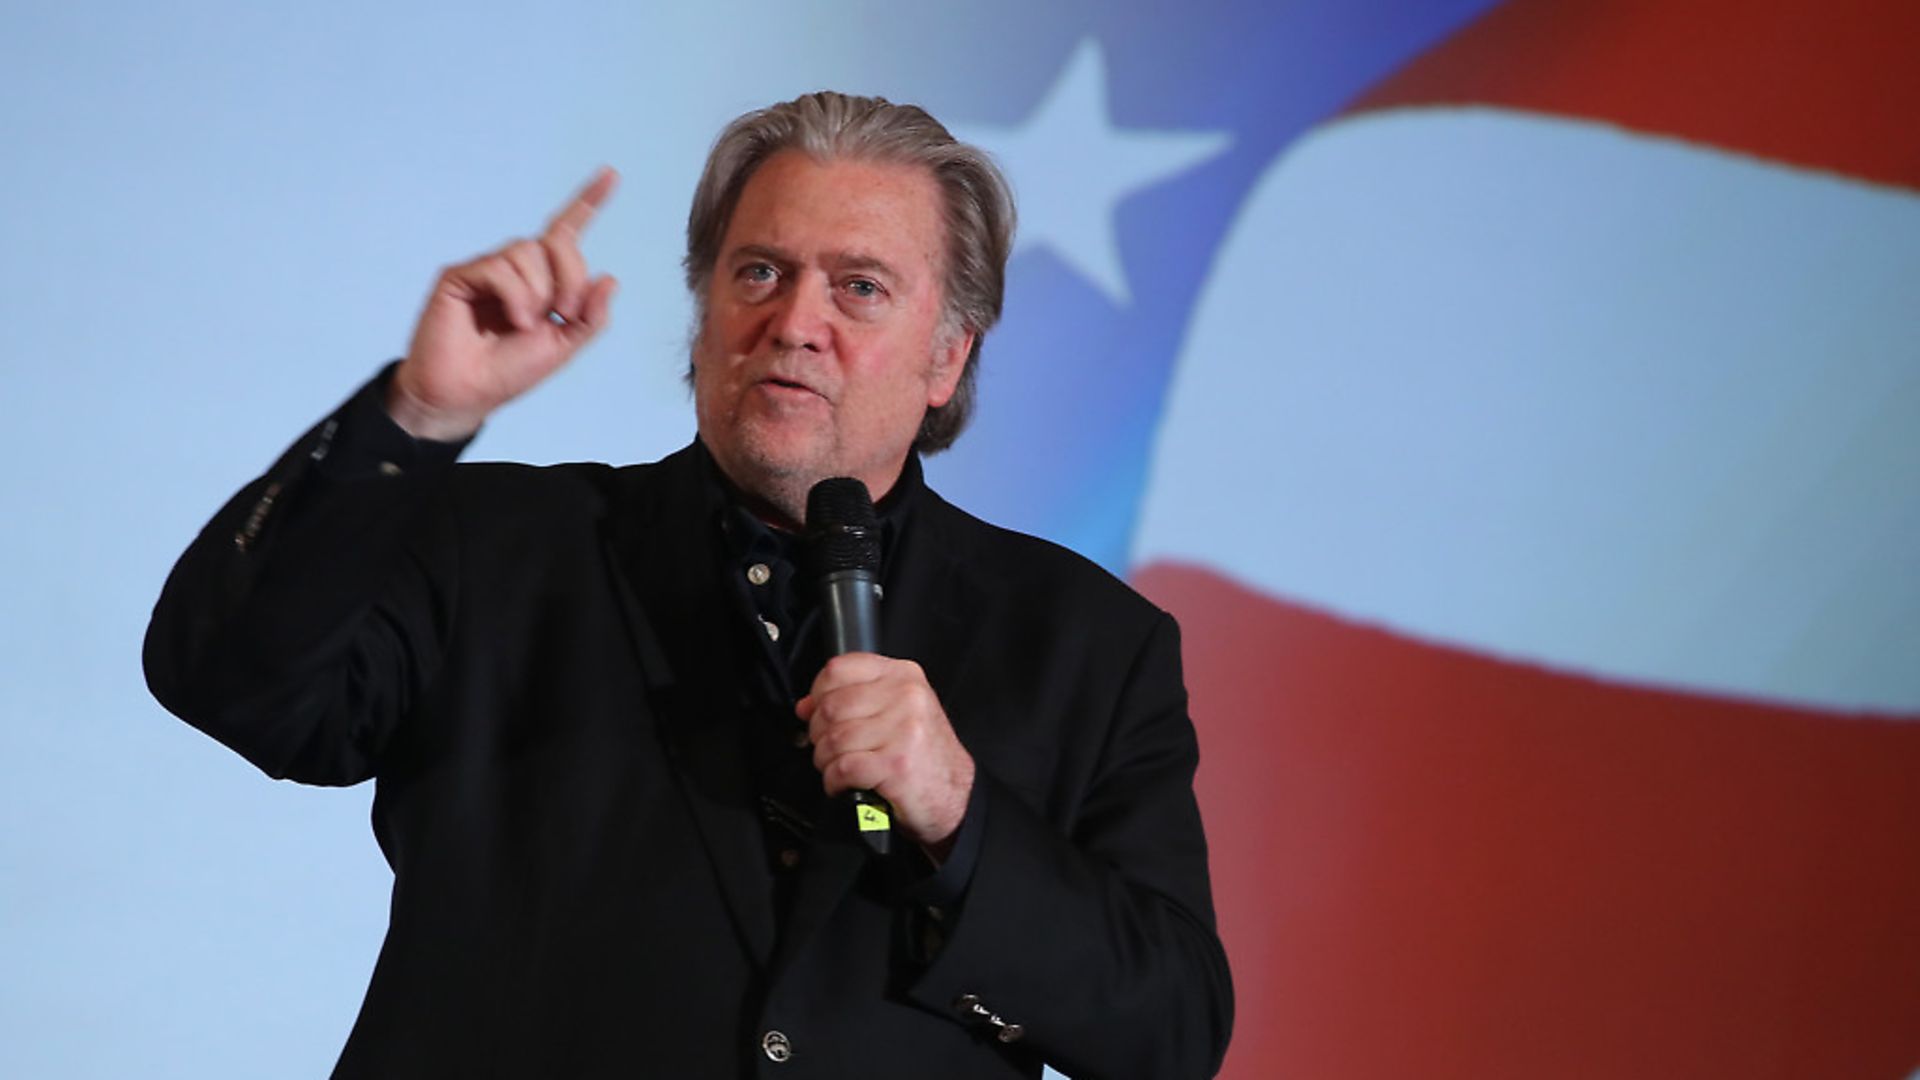 Steve Bannon, former White House Chief Strategist to U.S. President Donald Trump, speaks at a debate.  (Photo by Sean Gallup/Getty Images) - Credit: Getty Images